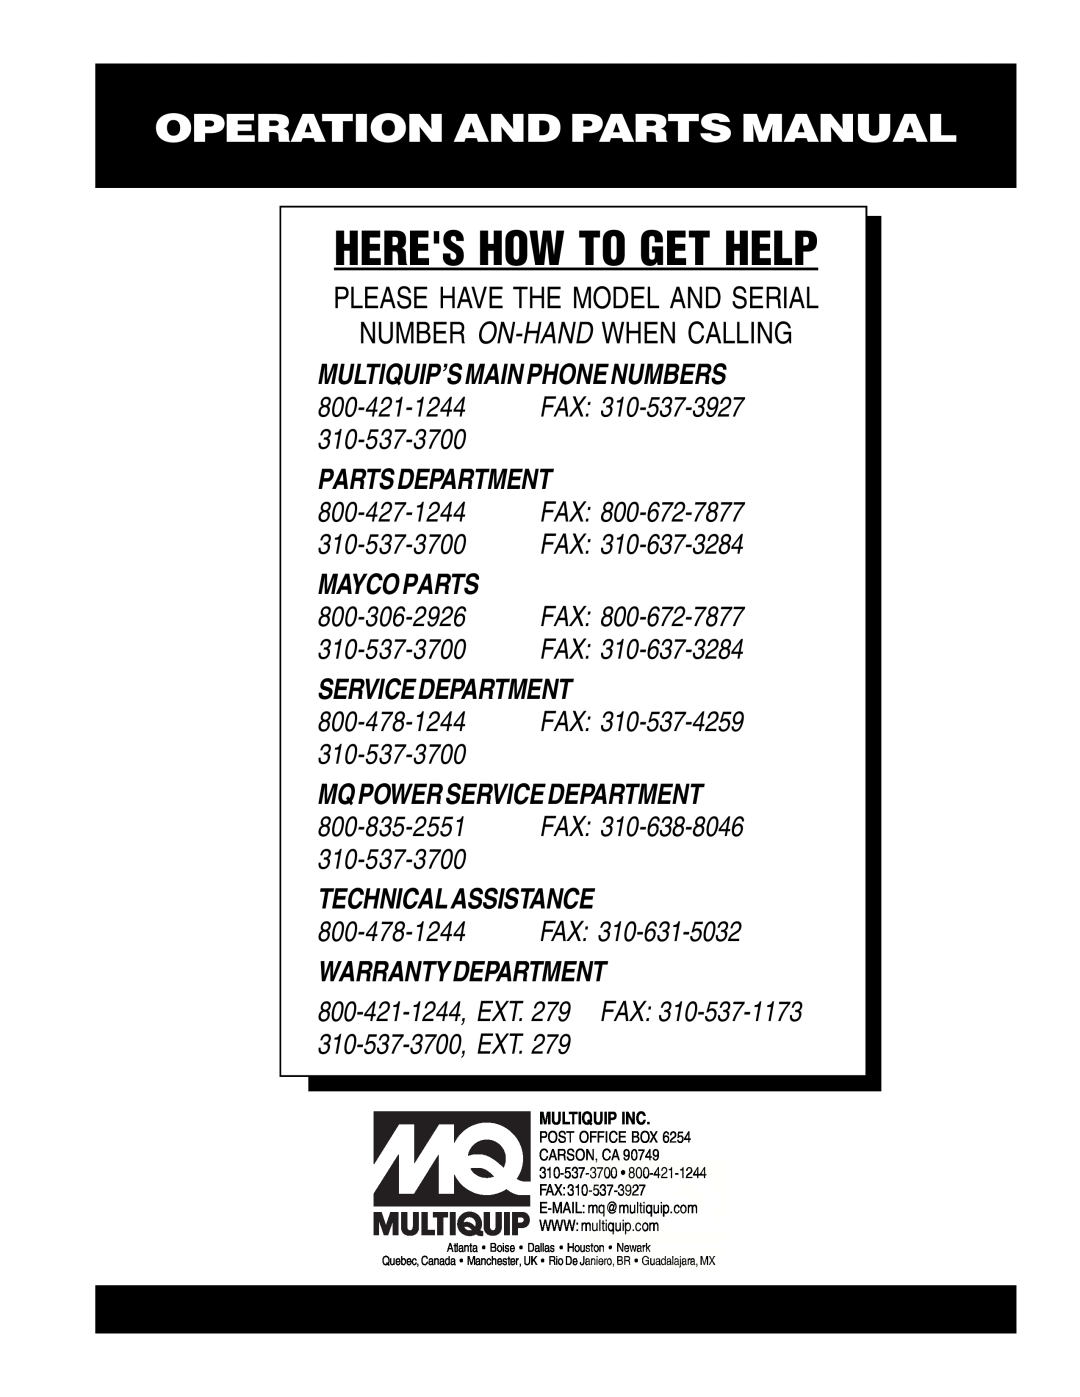 Multiquip MC-62S, MC-62P Heres How To Get Help, Operation And Parts Manual, Multiquip’Smainphonenumbers, Partsdepartment 